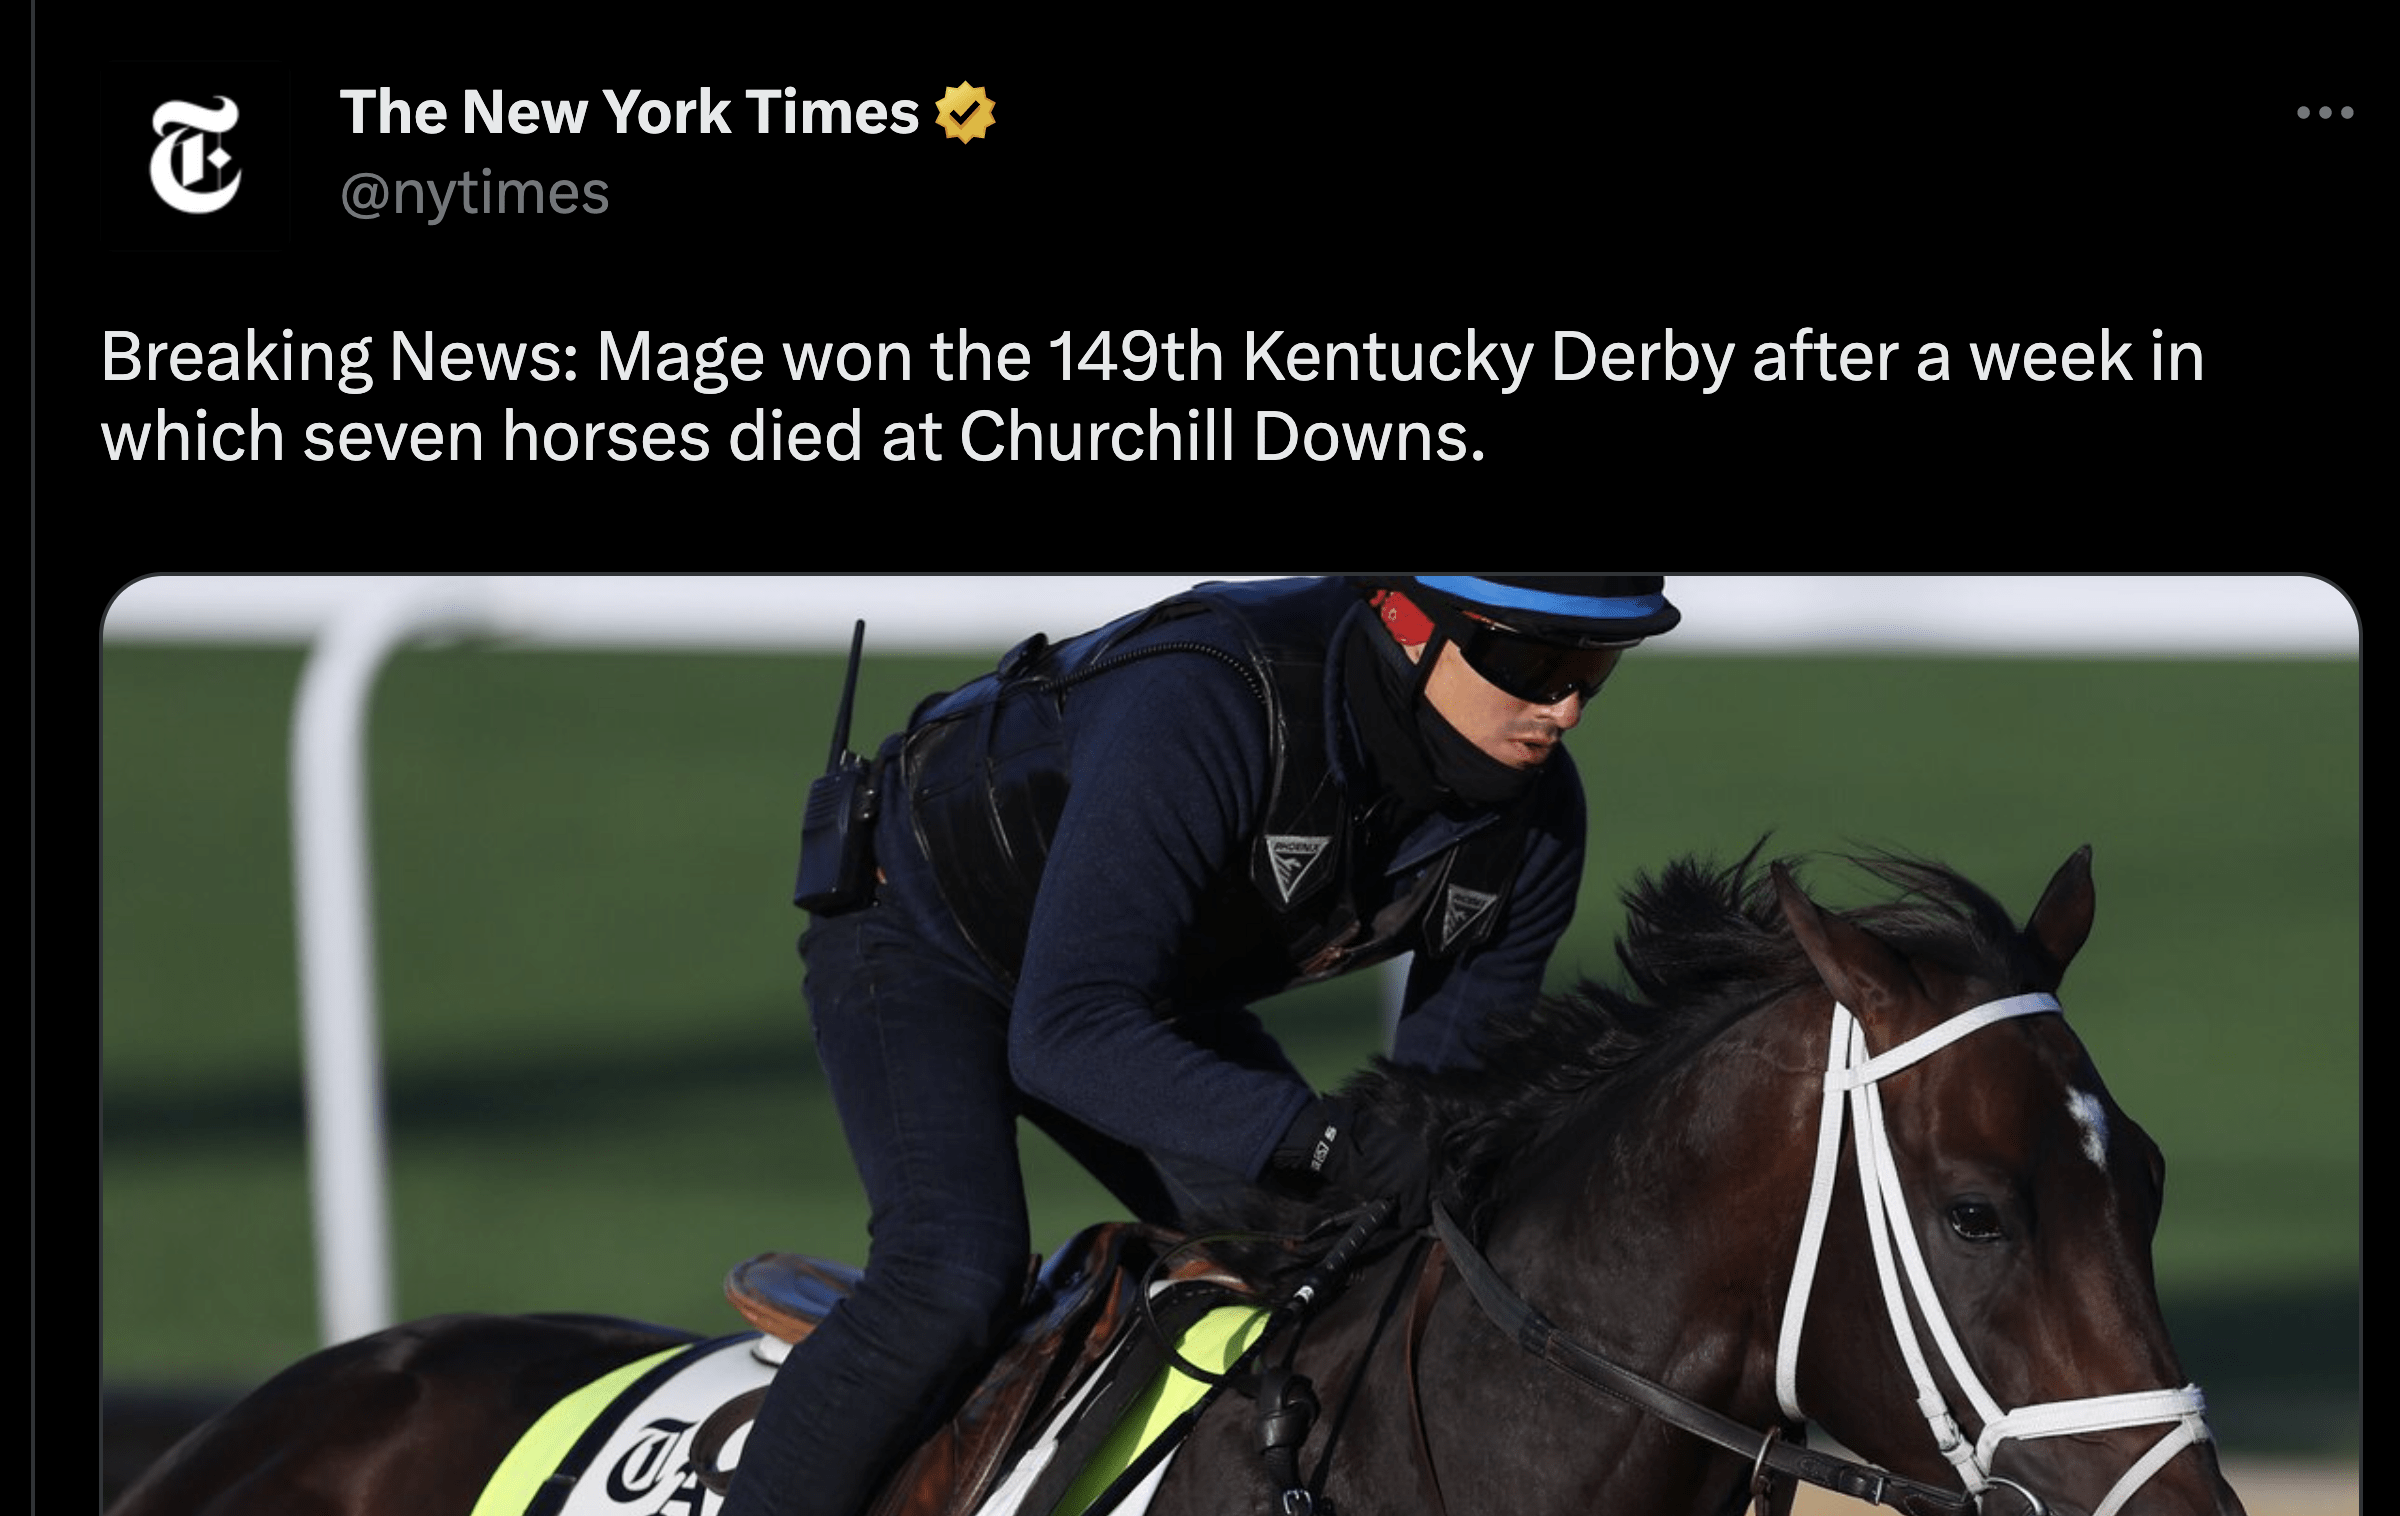 Nation reacts to spree of horse deaths at Kentucky tracks